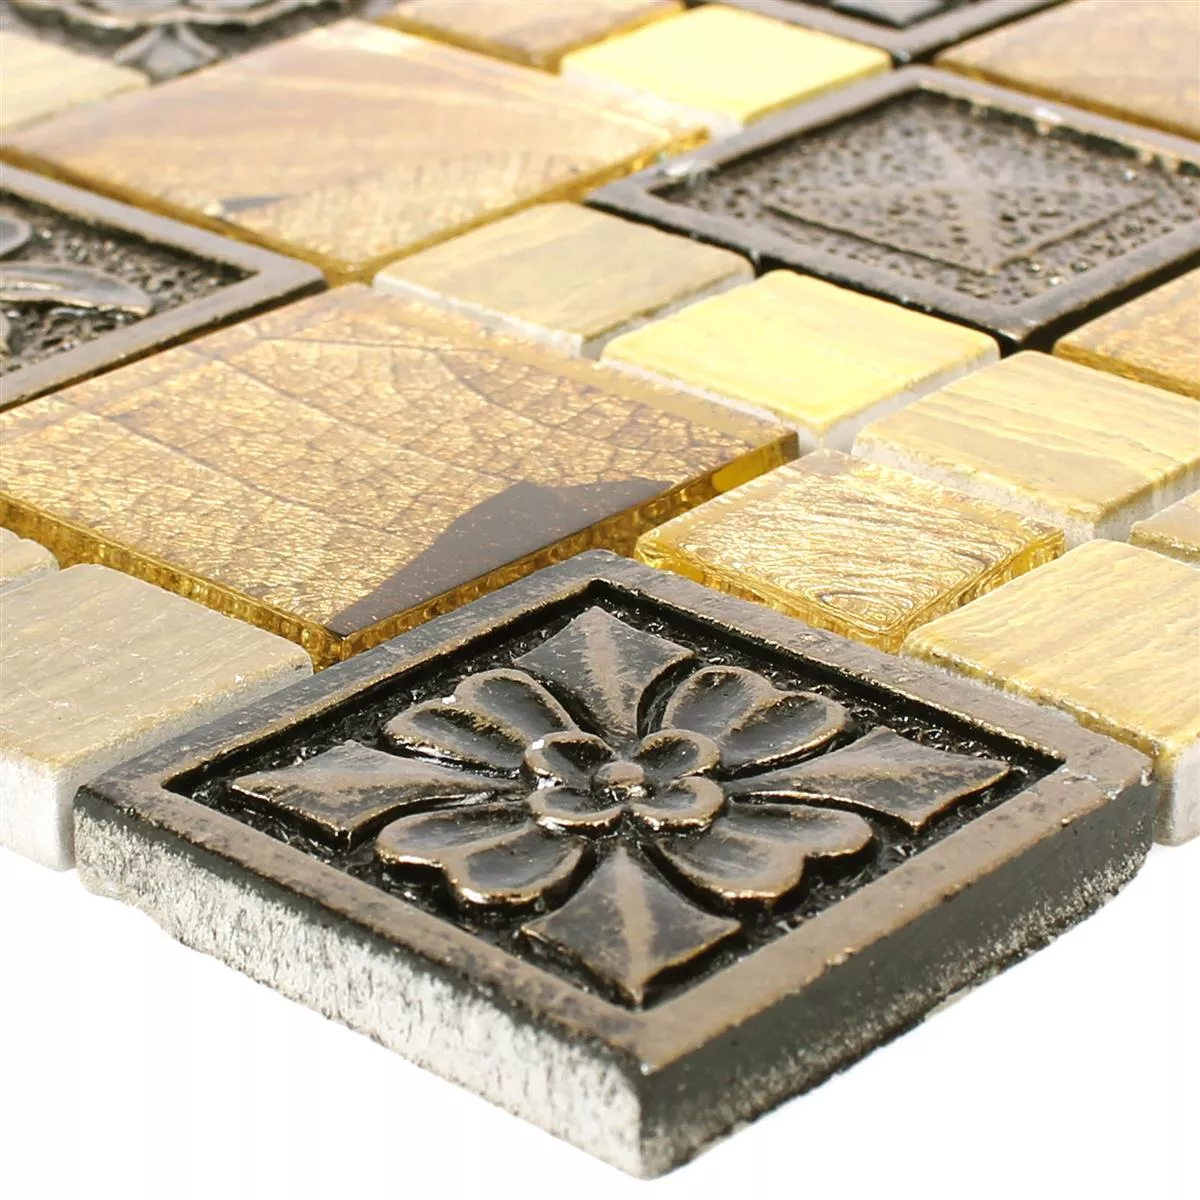 Mosaic Tiles Levanzo Glass Resin Ornament Mix Gold